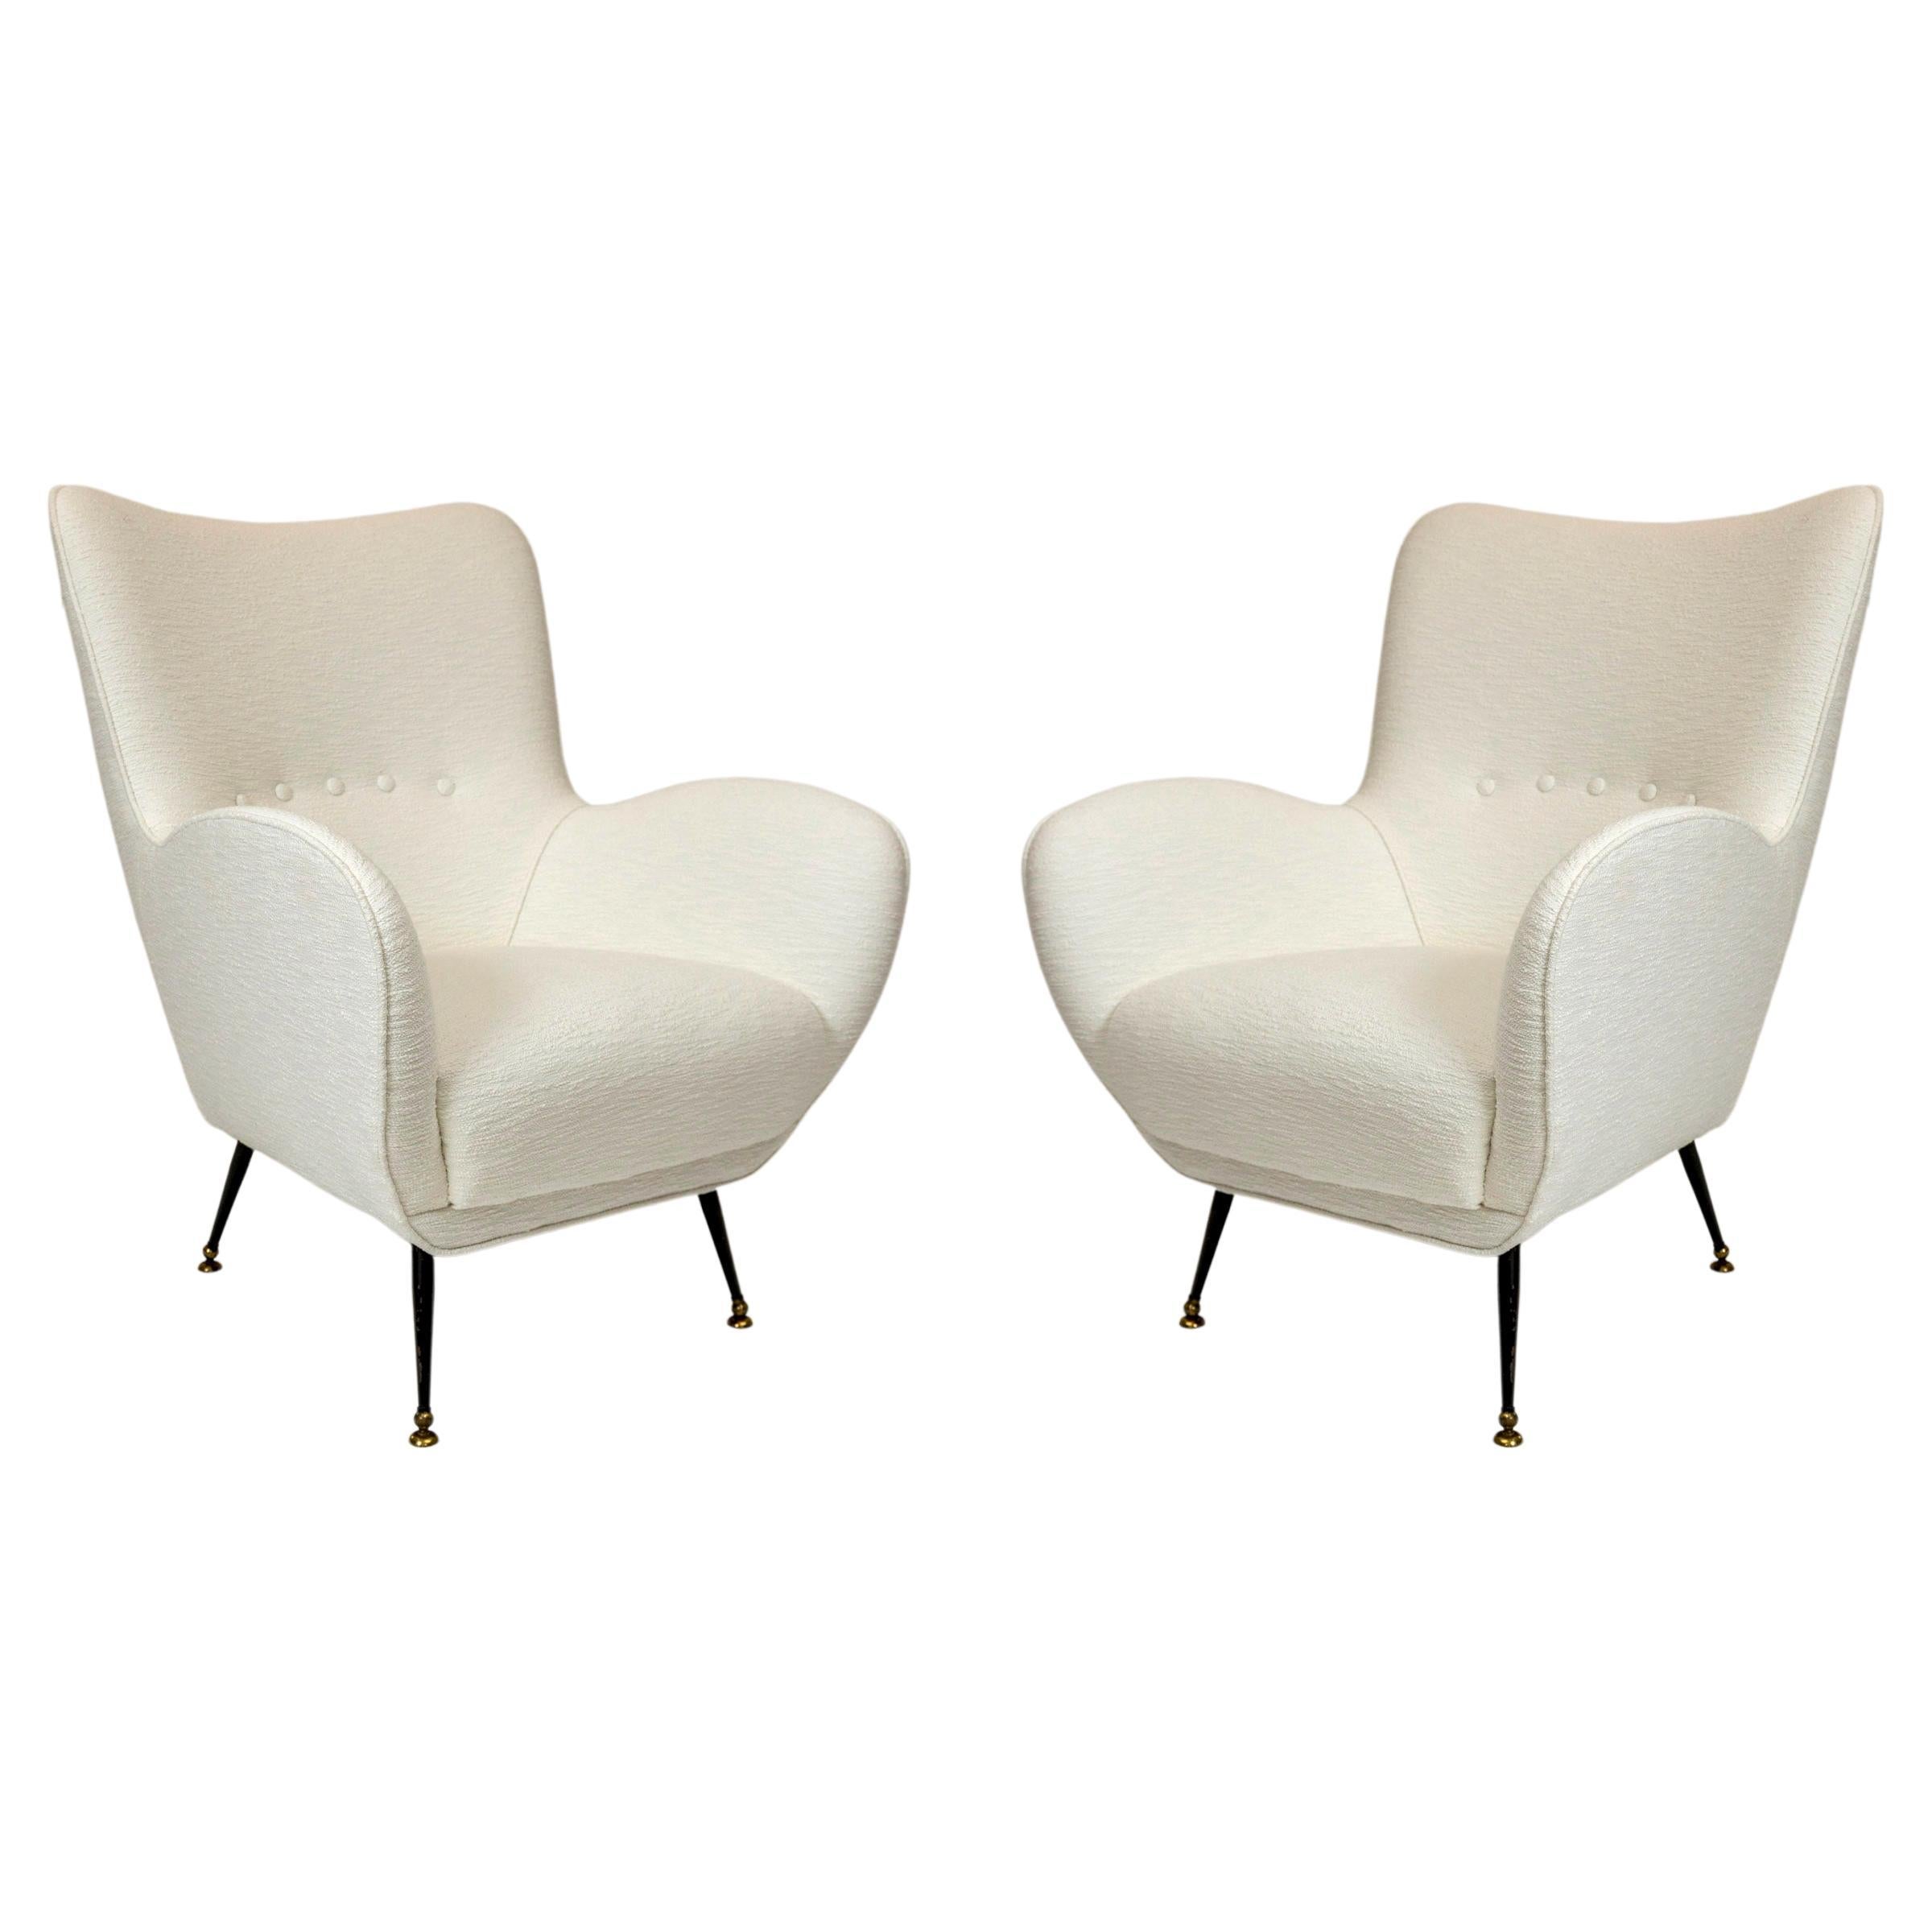 Pair Of Italian Mid Century Curving Lounge Chairs For Sale